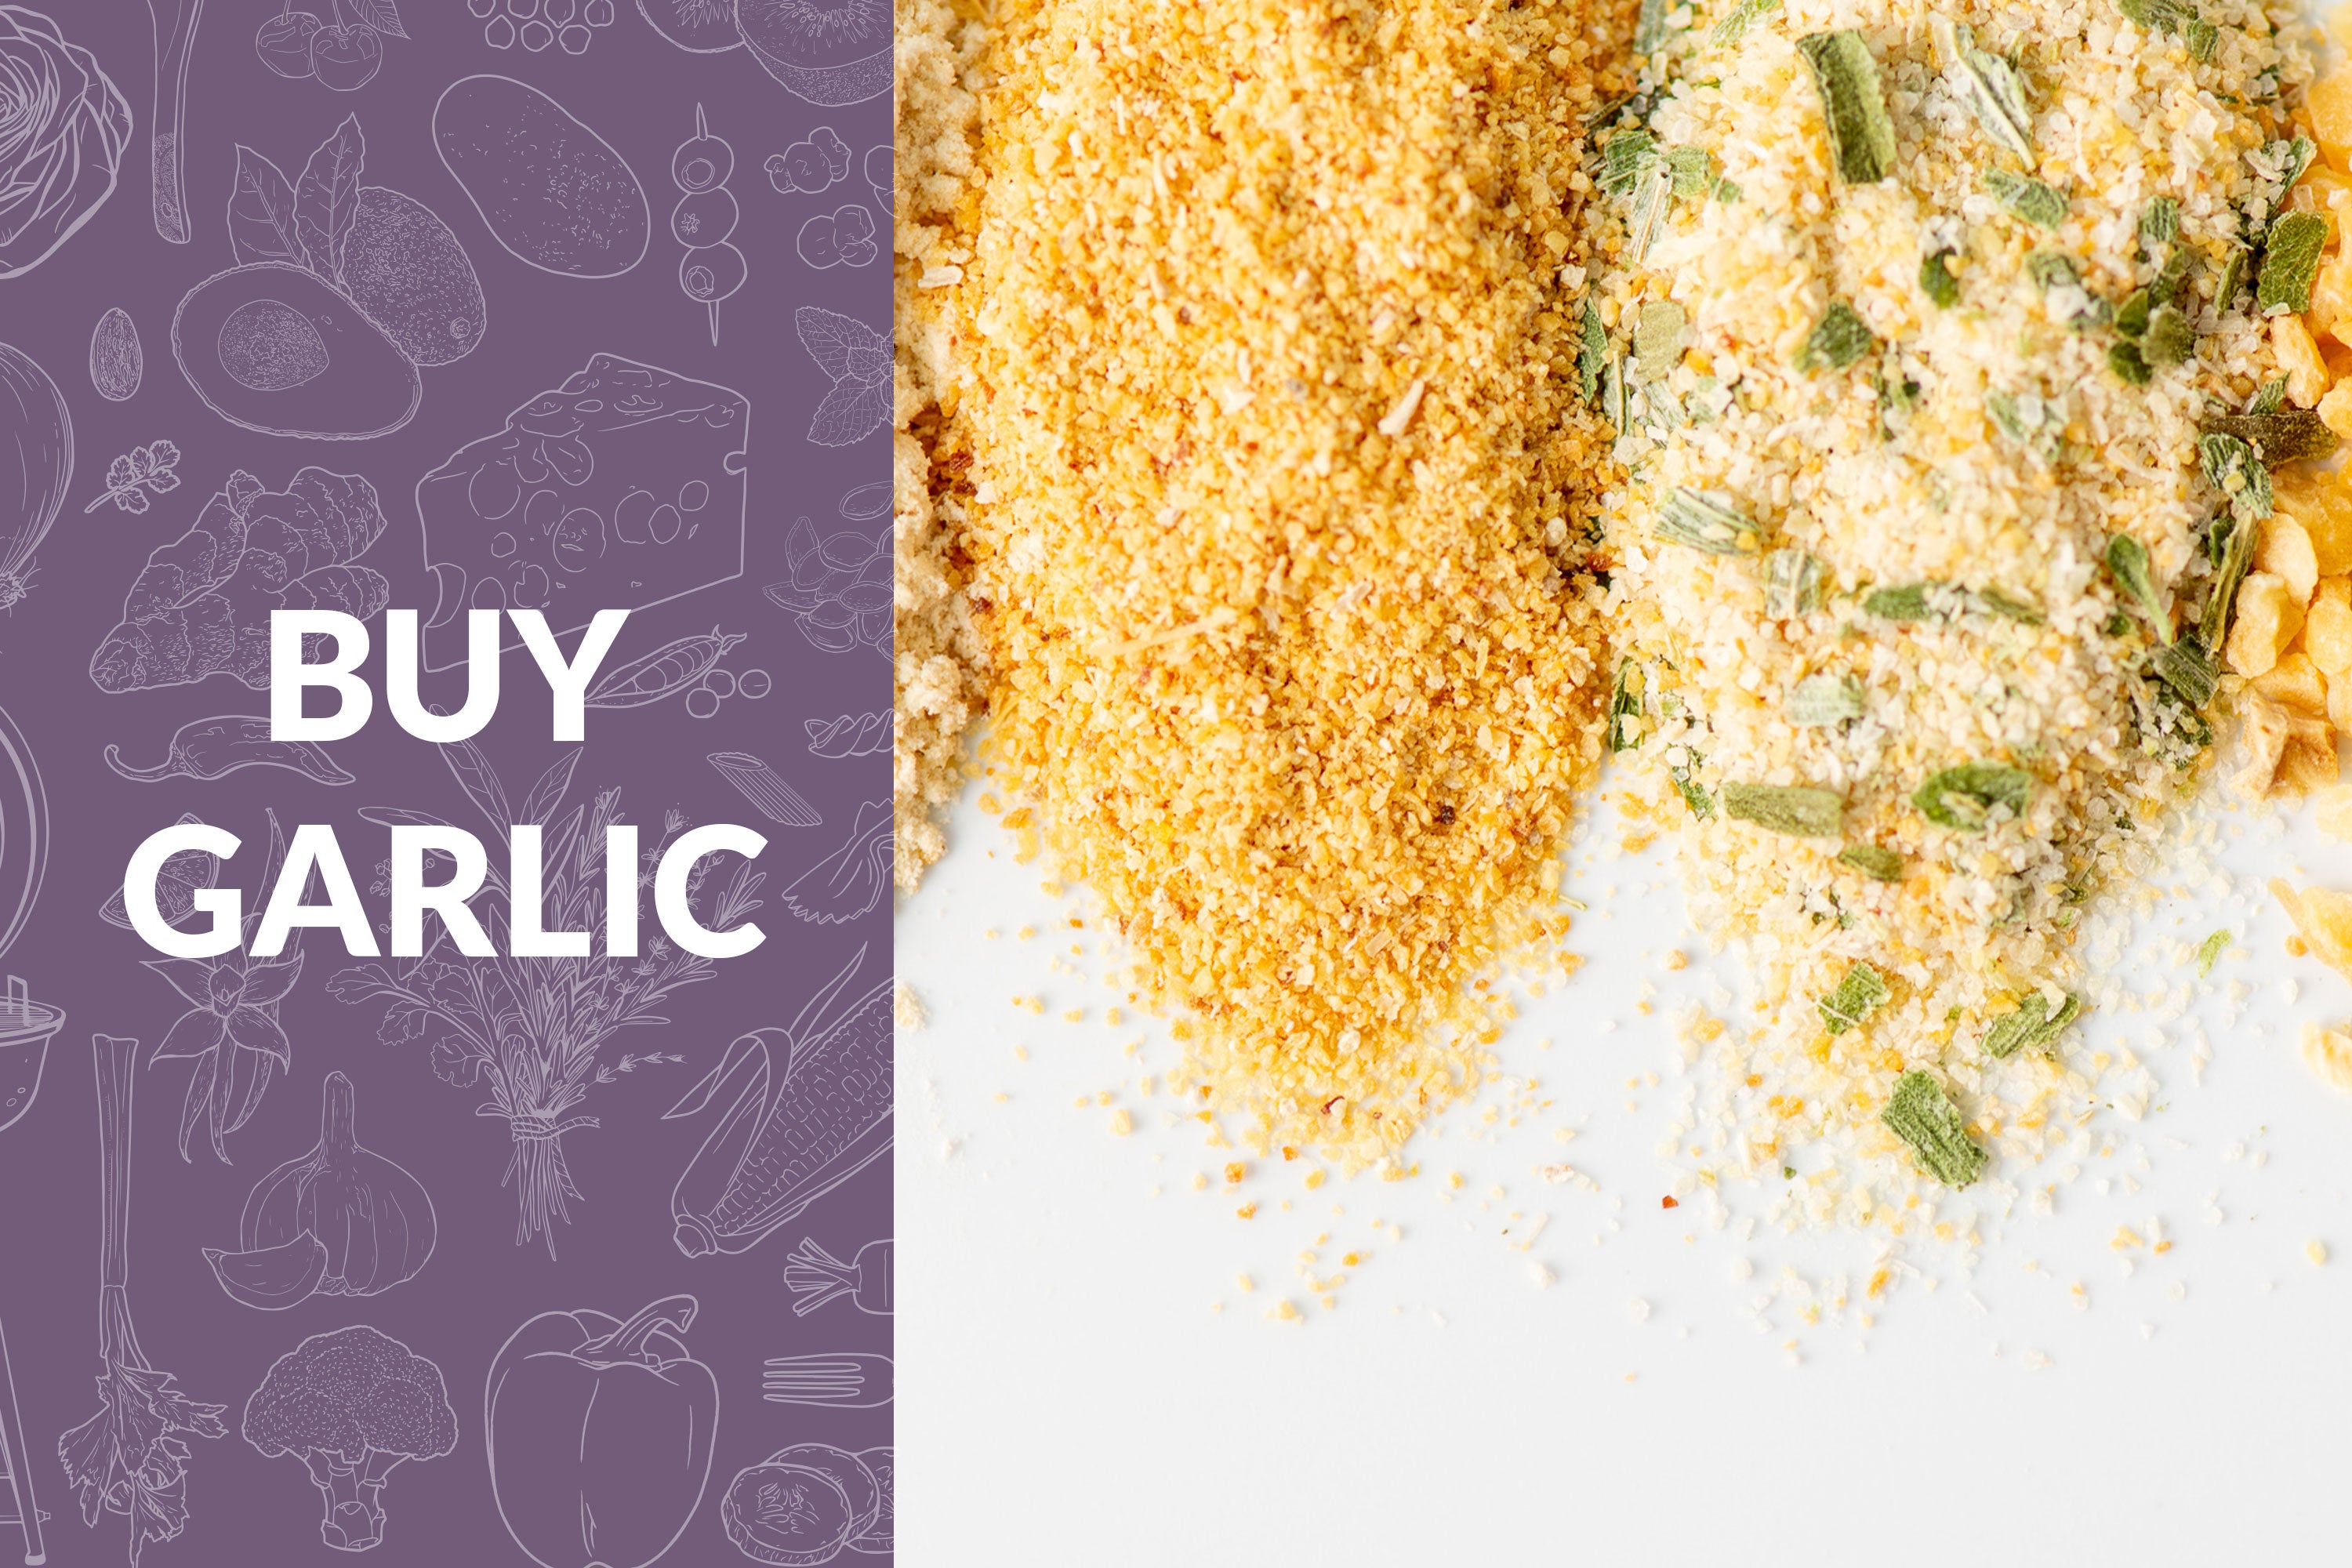 Buy Garlic with spill of different types of garlic